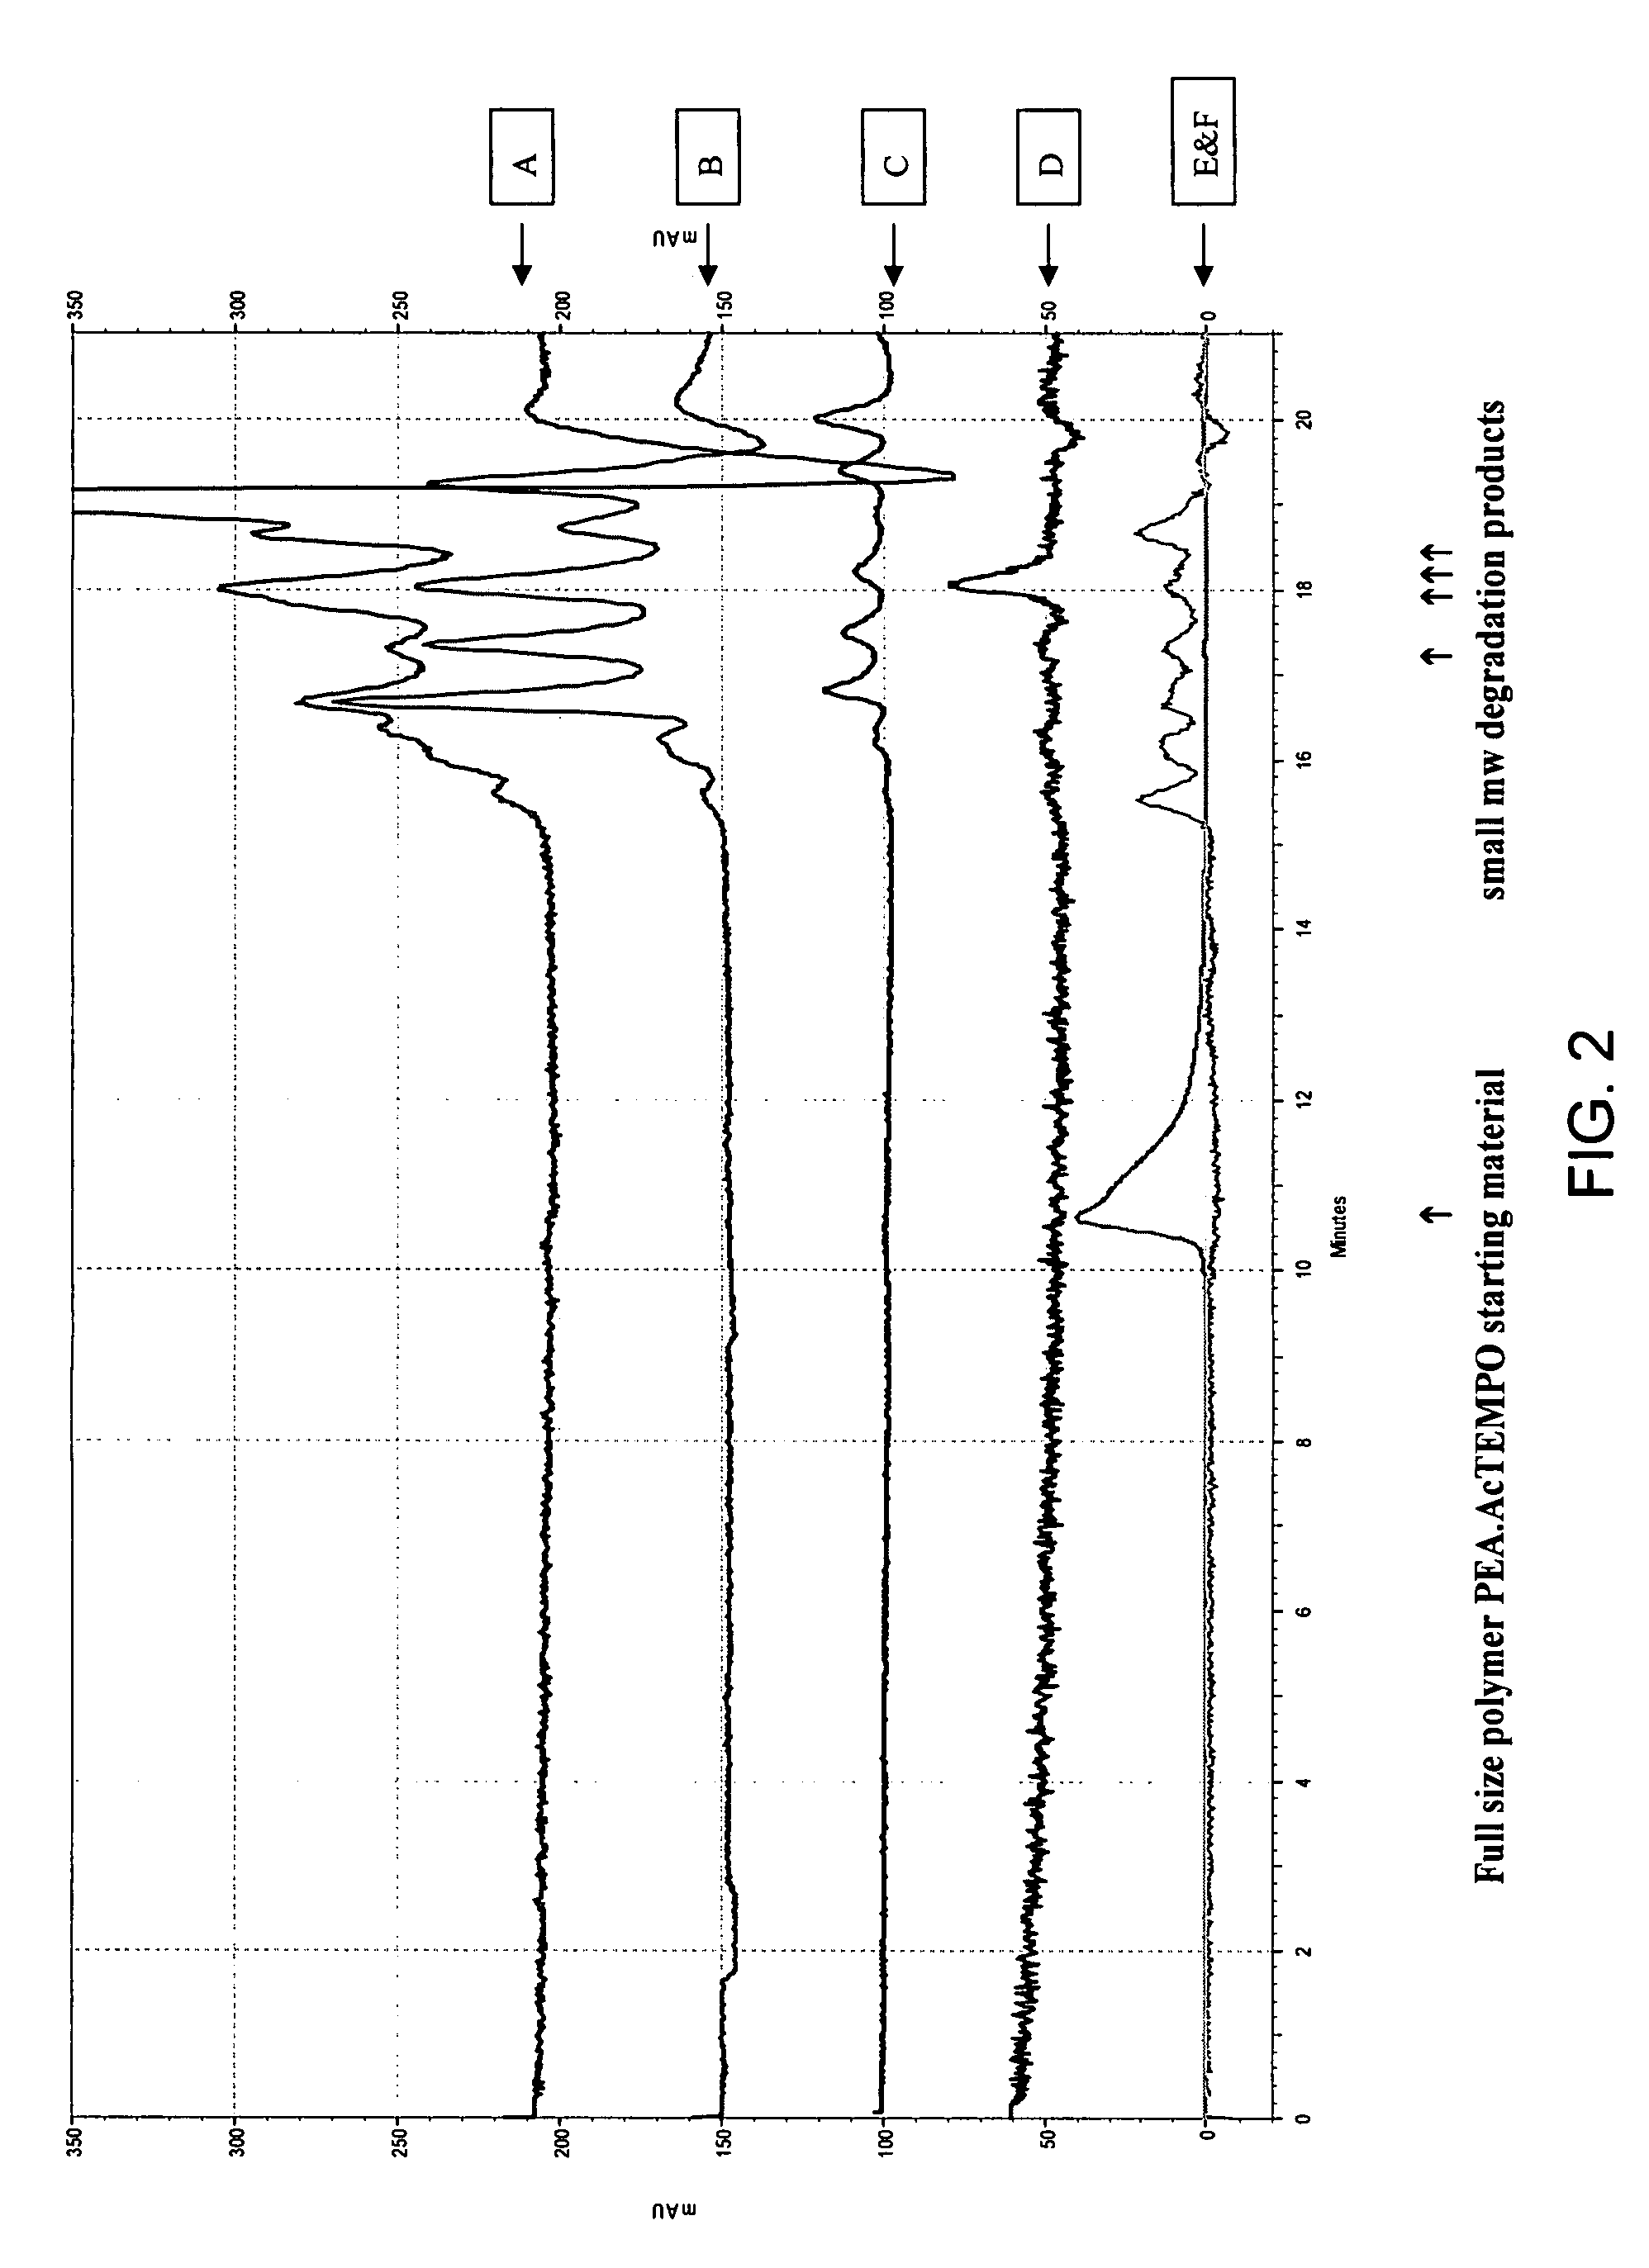 Biodegradable polymer adhesion barriers